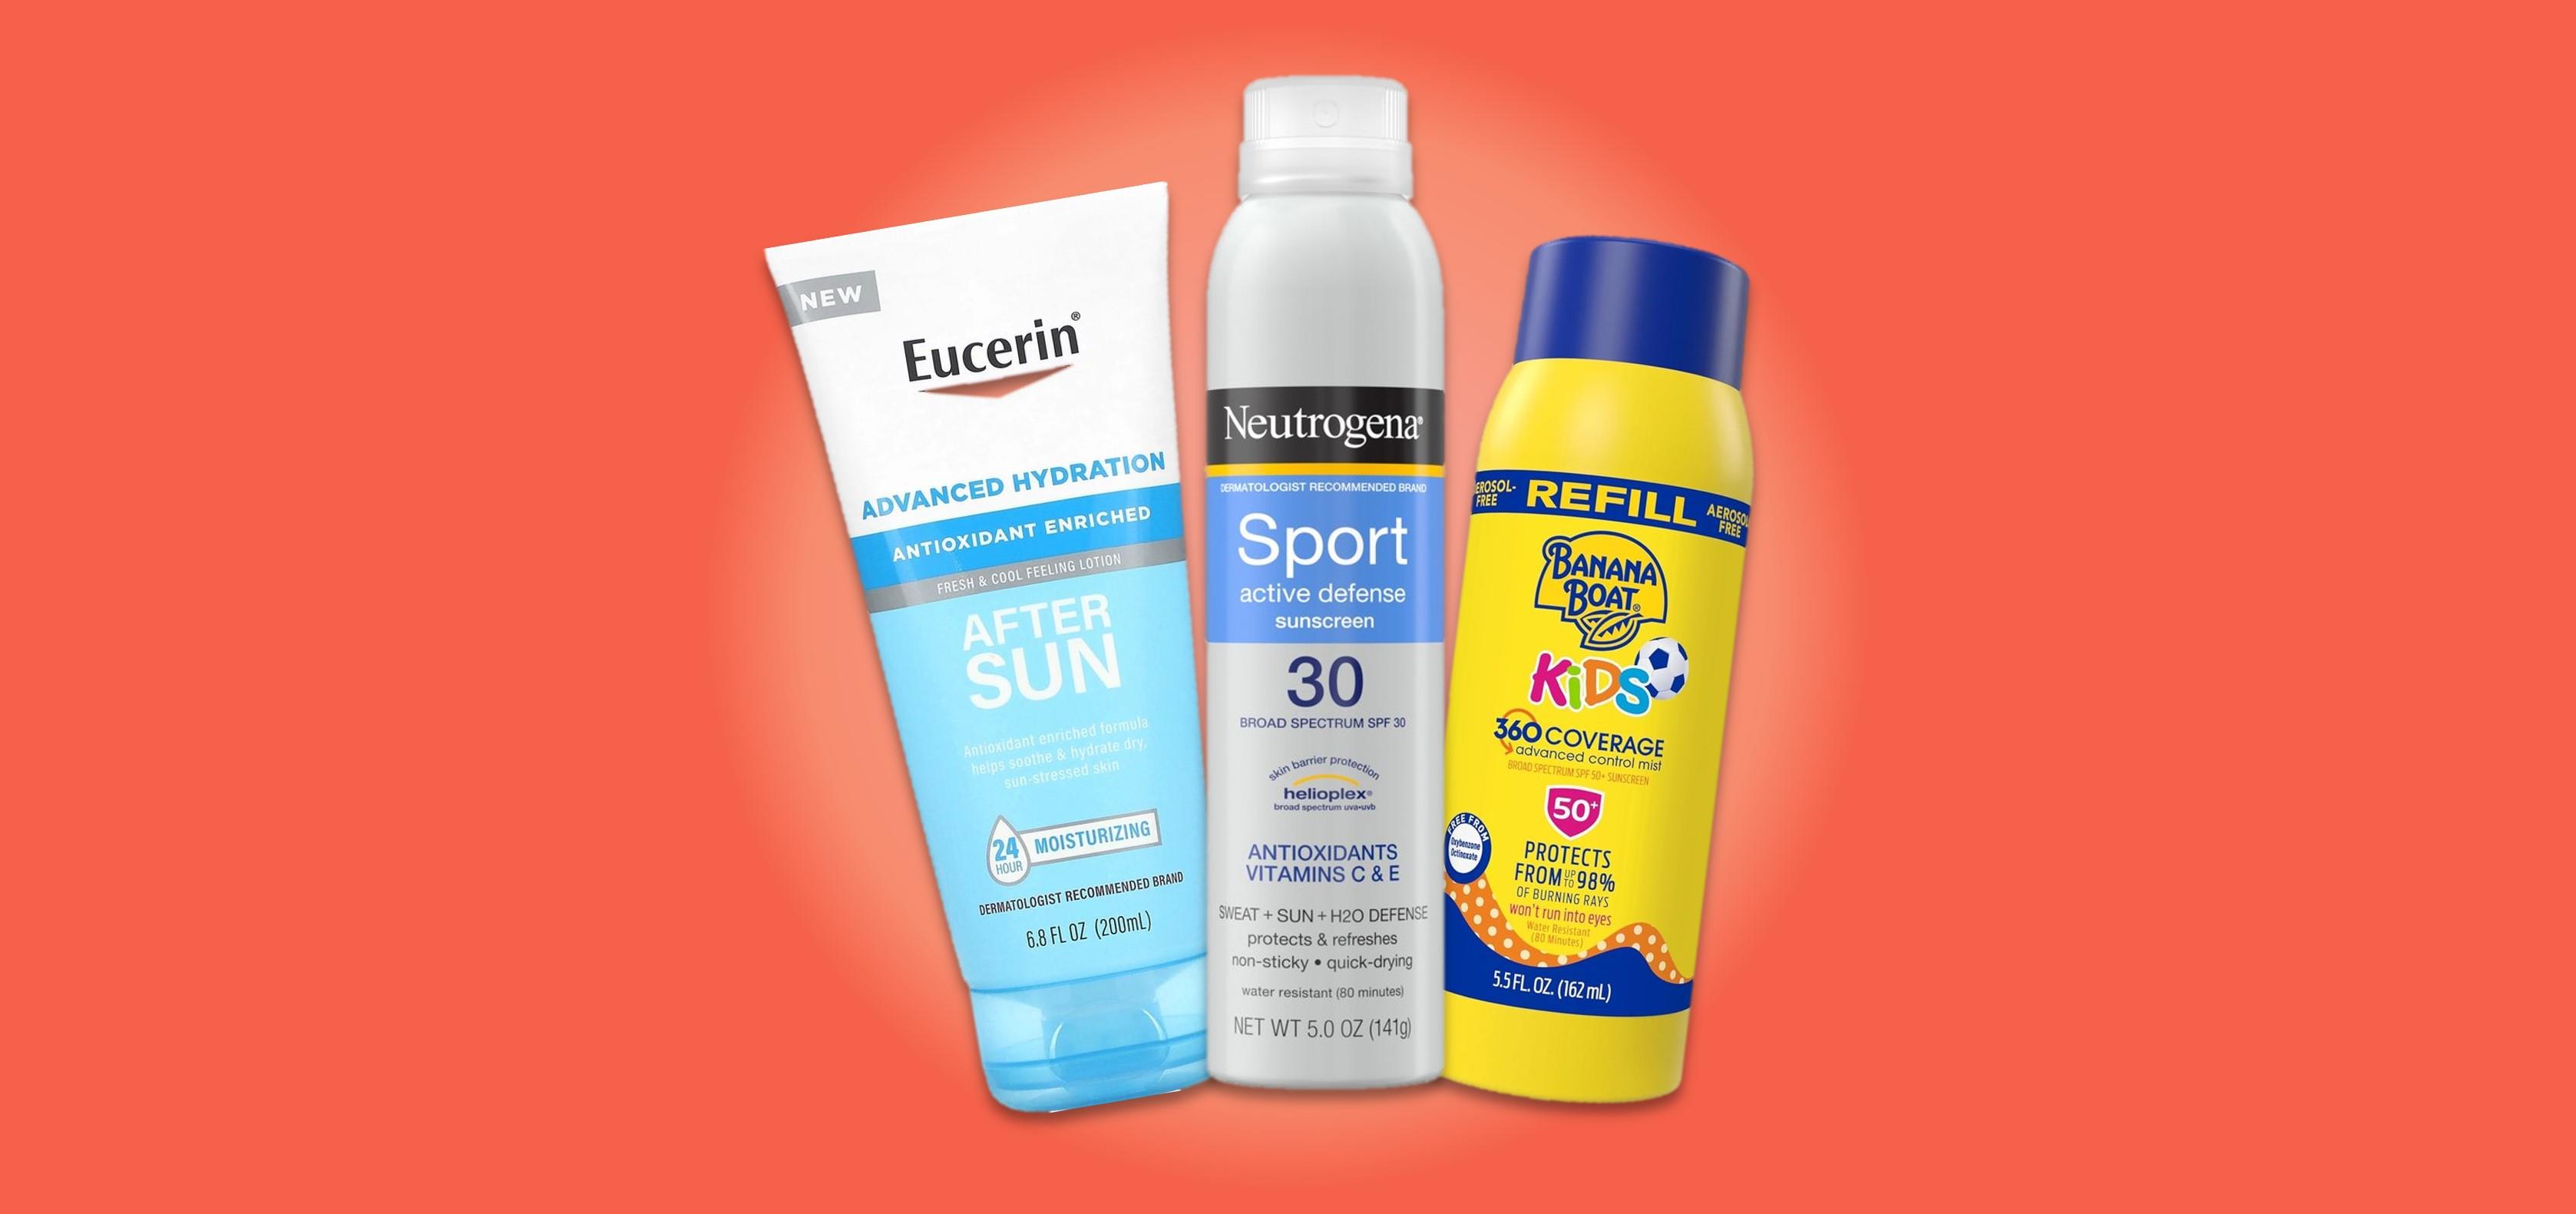 After sun and sunscreen products